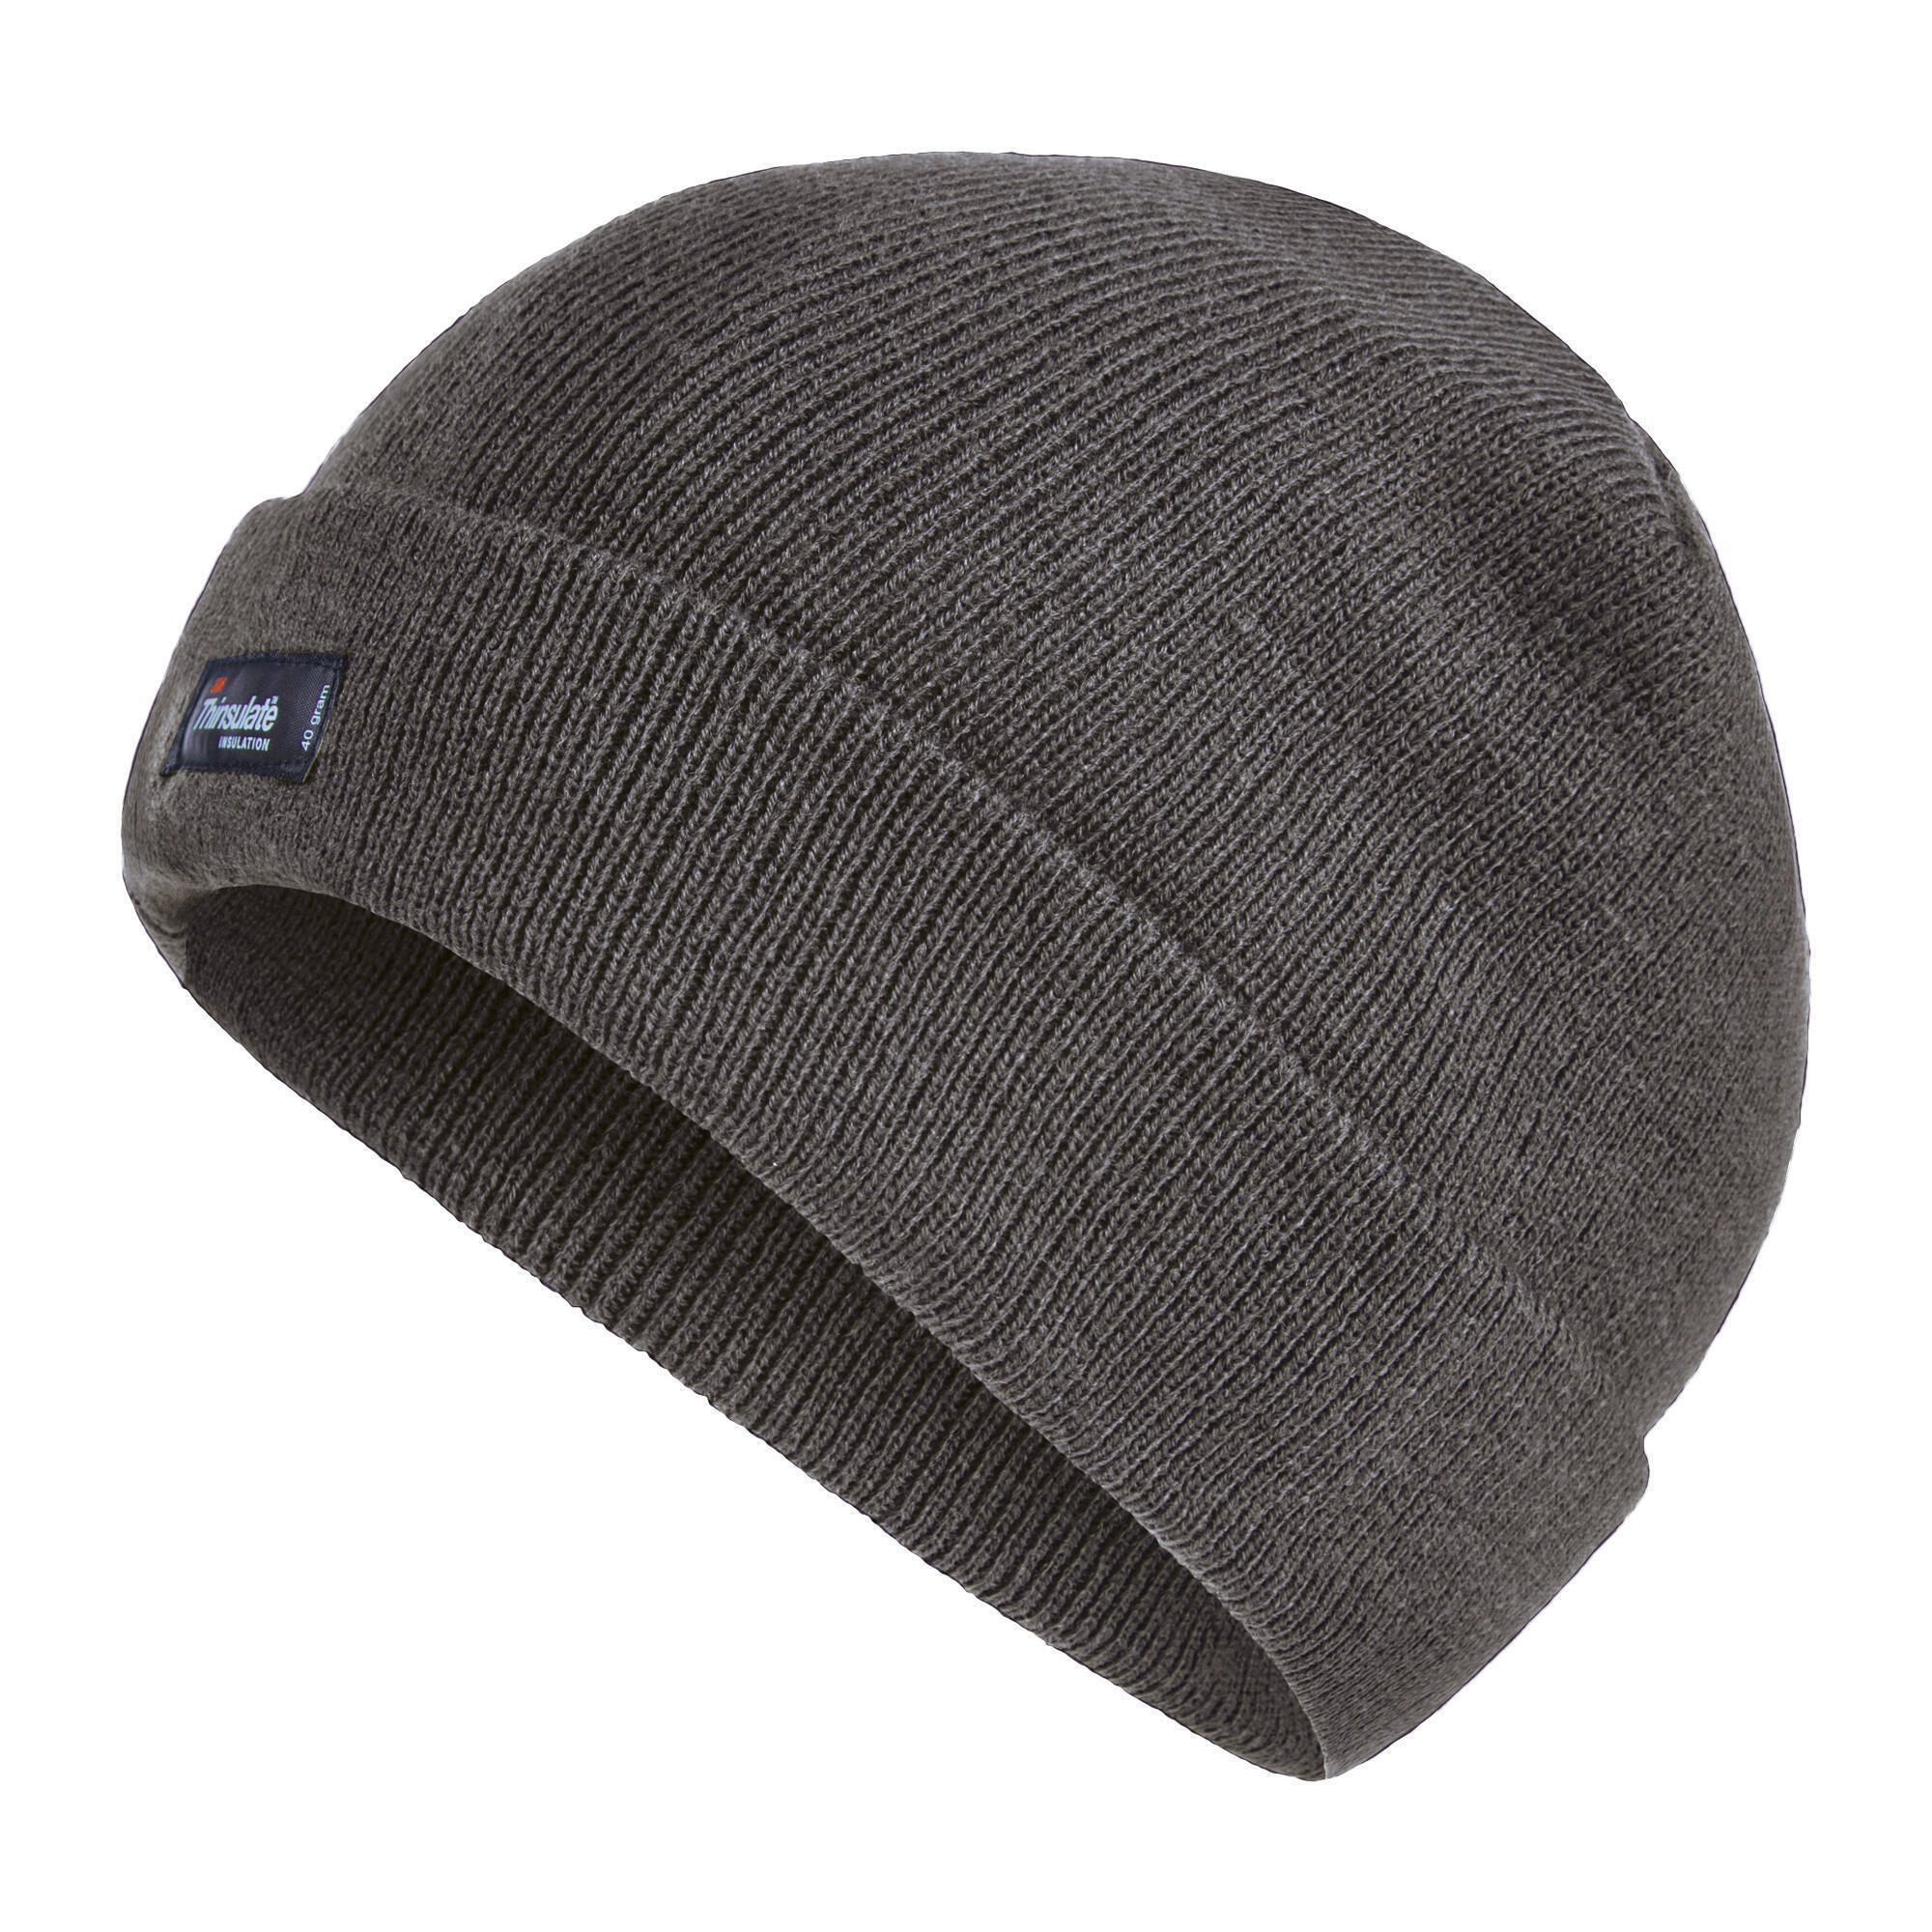 Unisex Thinsulate Lined Winter Hat (Moss) 3/4